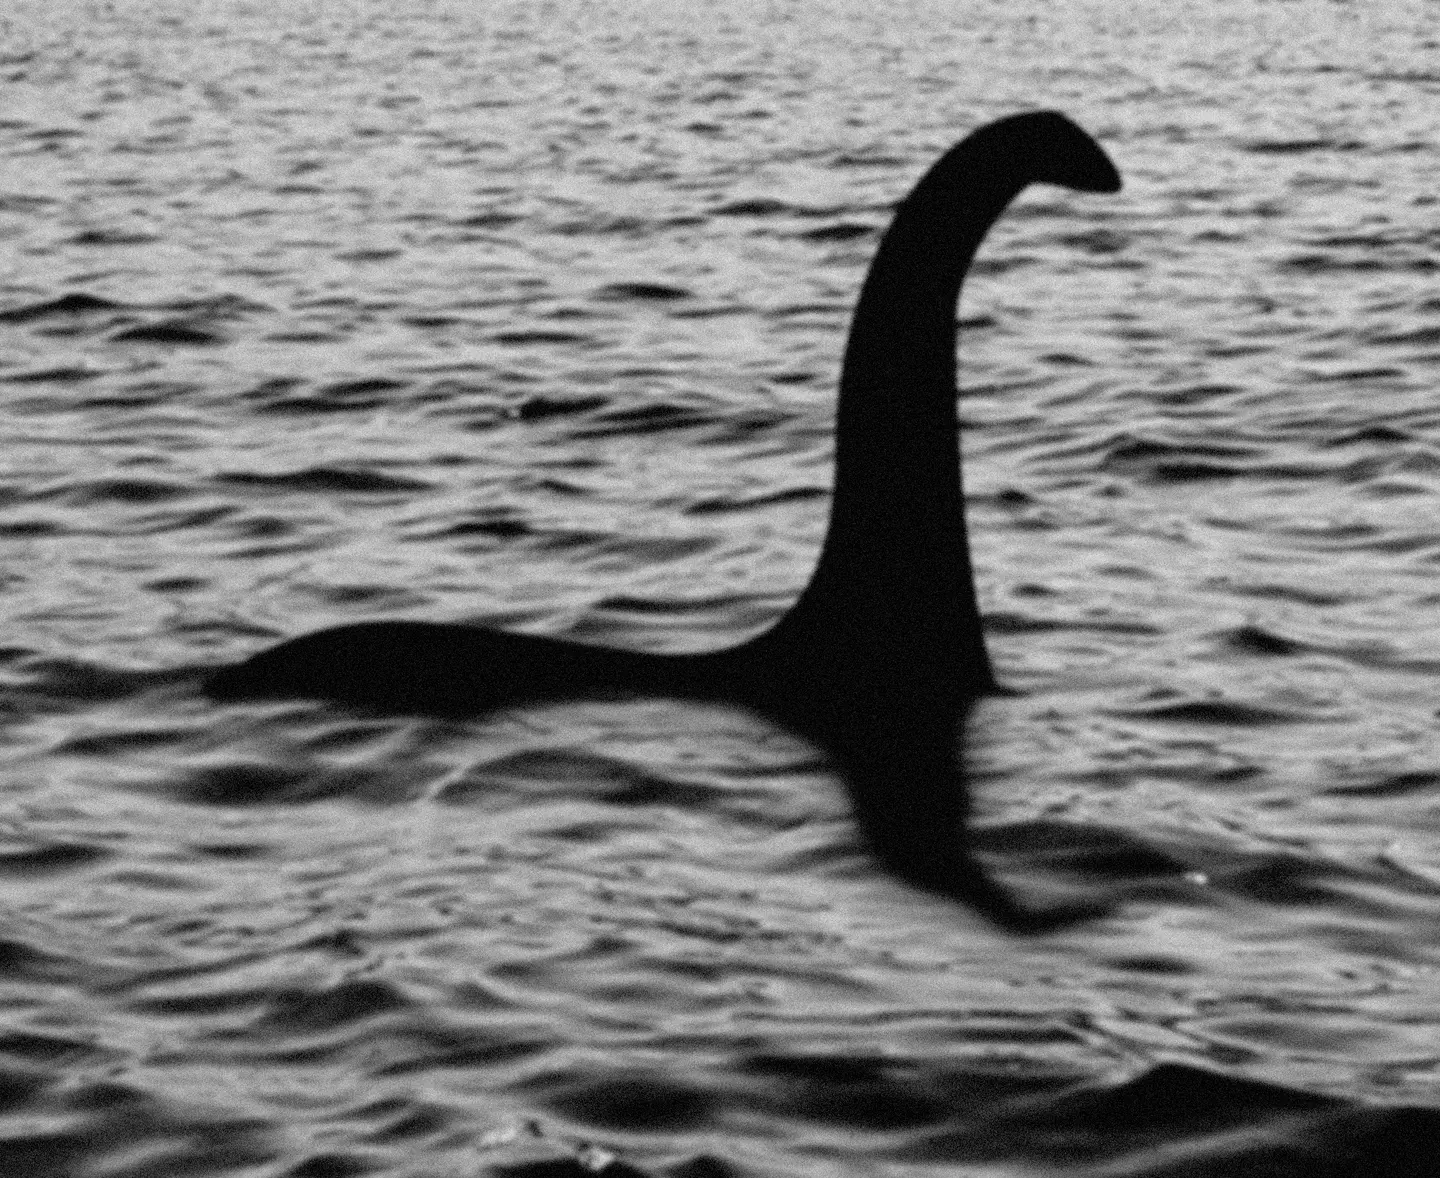 'Sightings' have been reported in the search for the Loch Ness Monster.